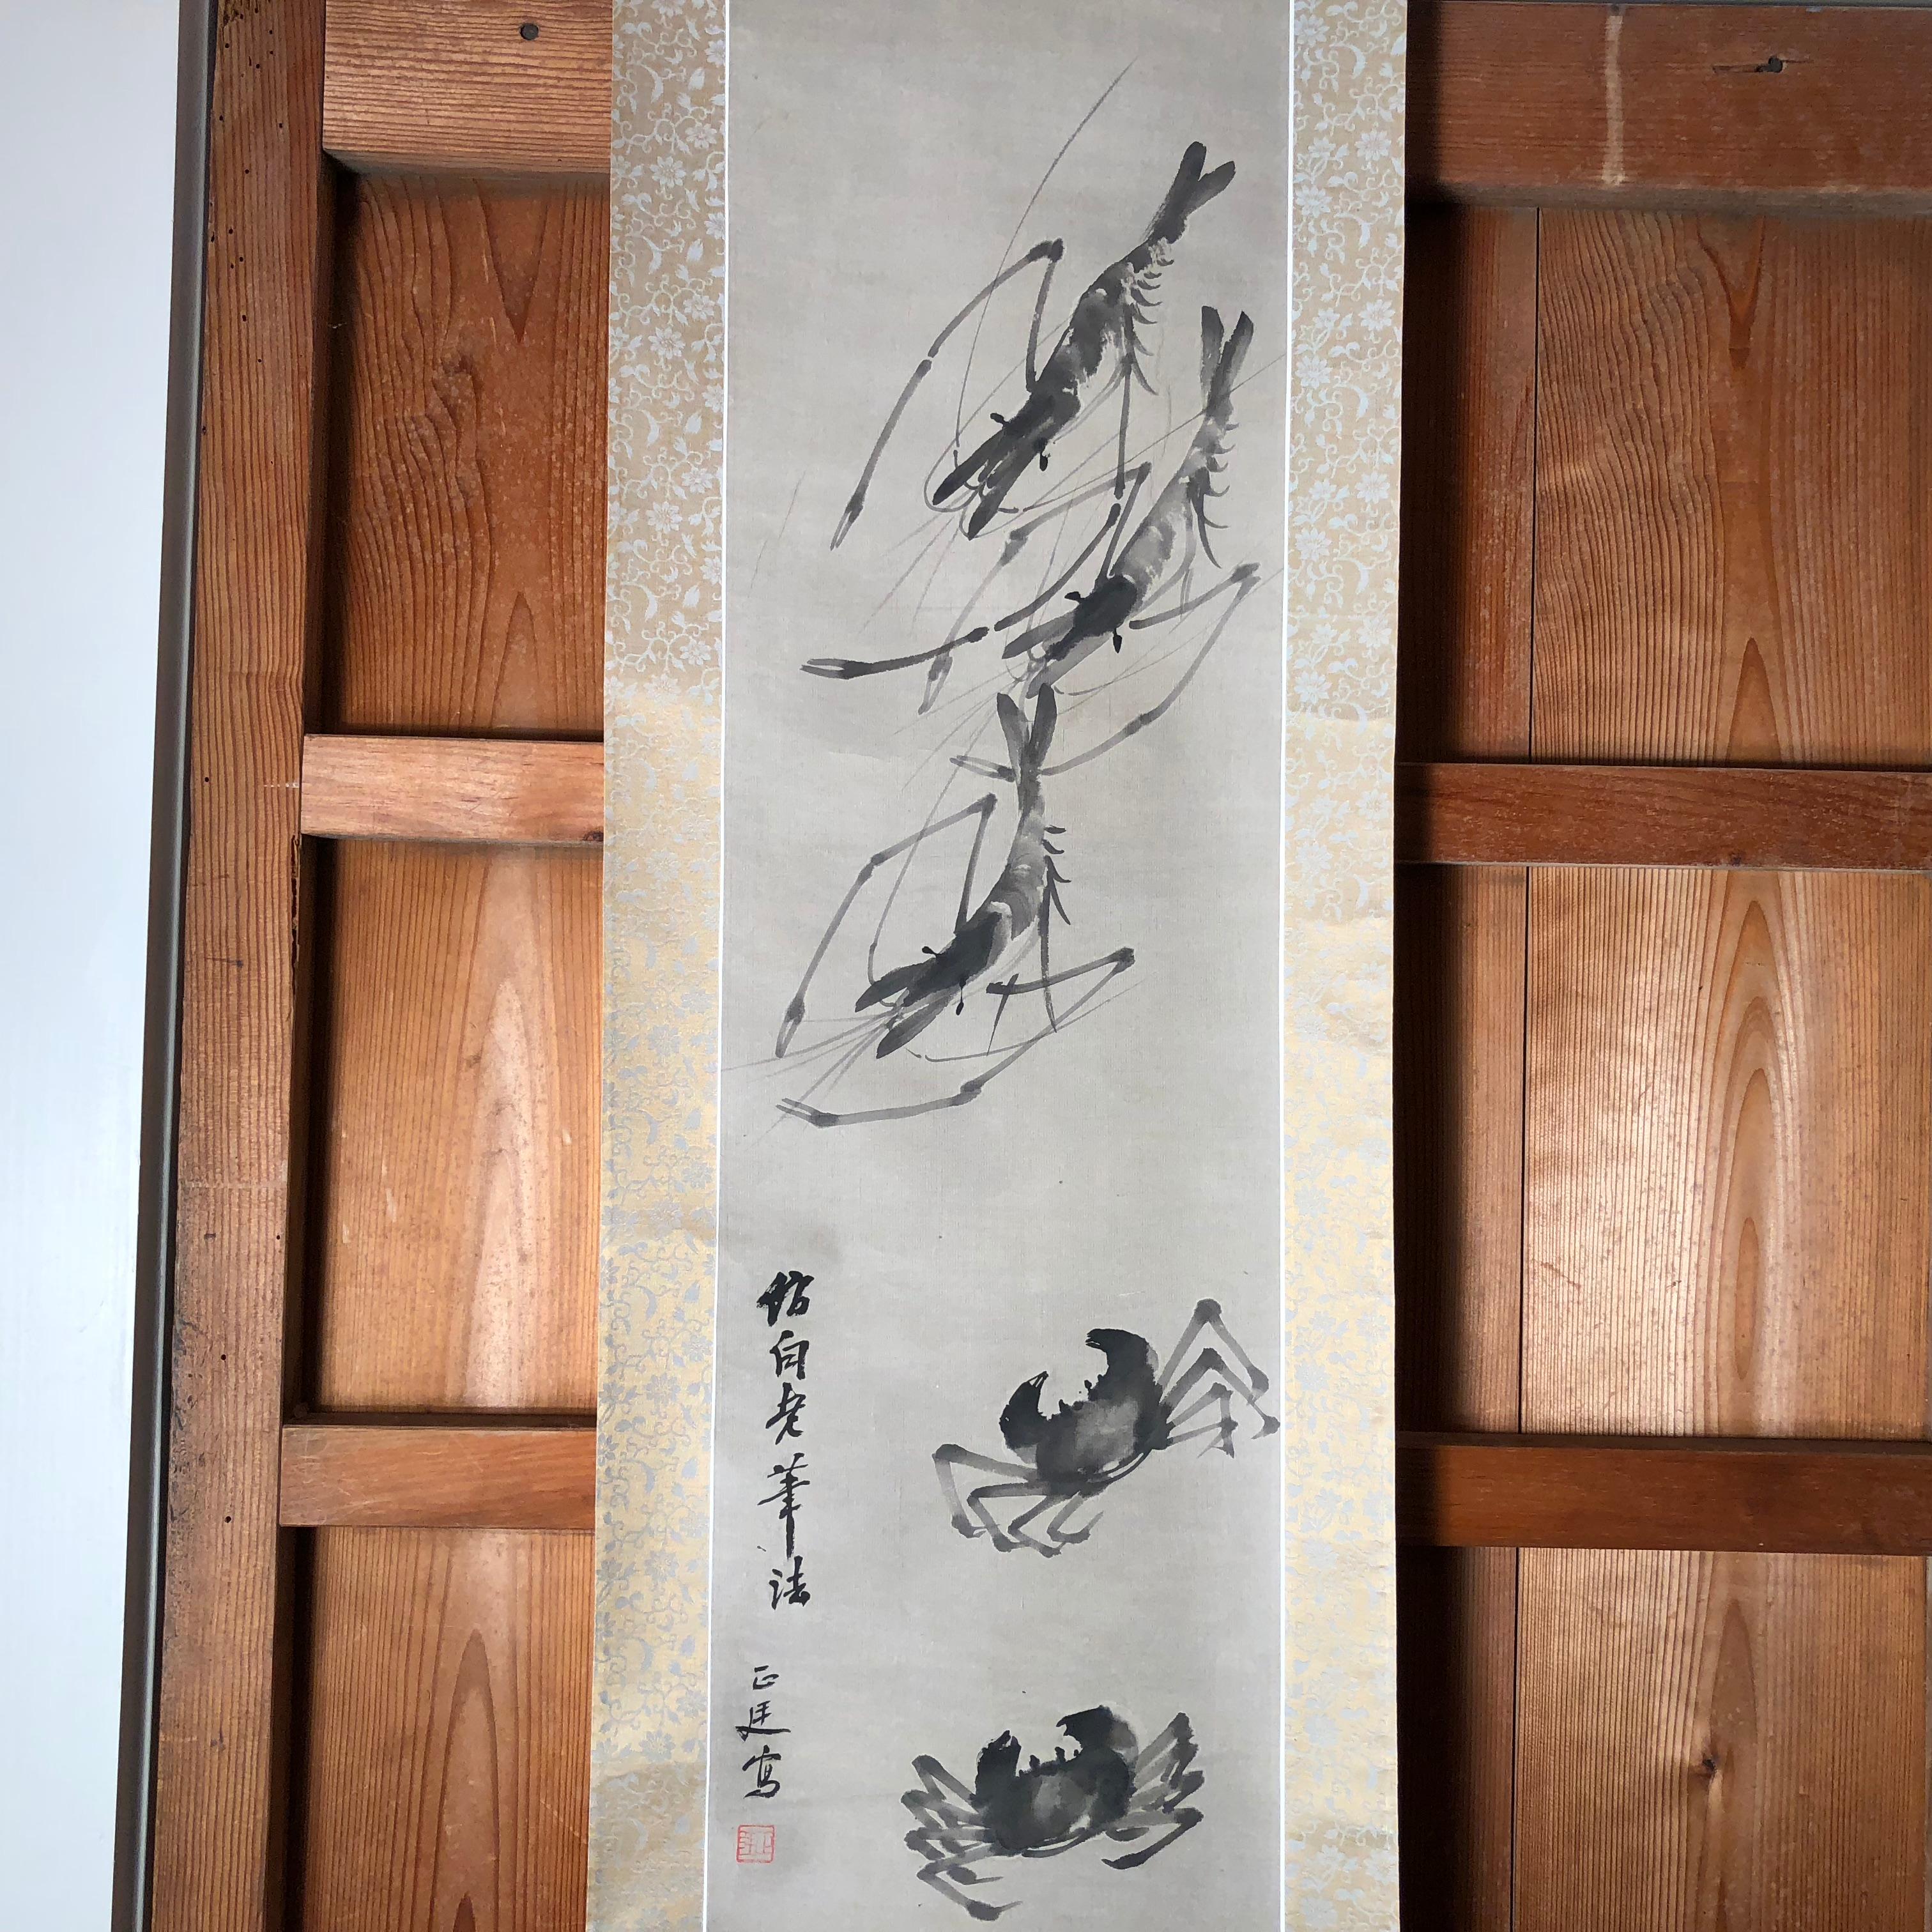 Delightful Shrimp and Crabs Japanese Antique Hand Painted Silk Scroll, Taisho 6